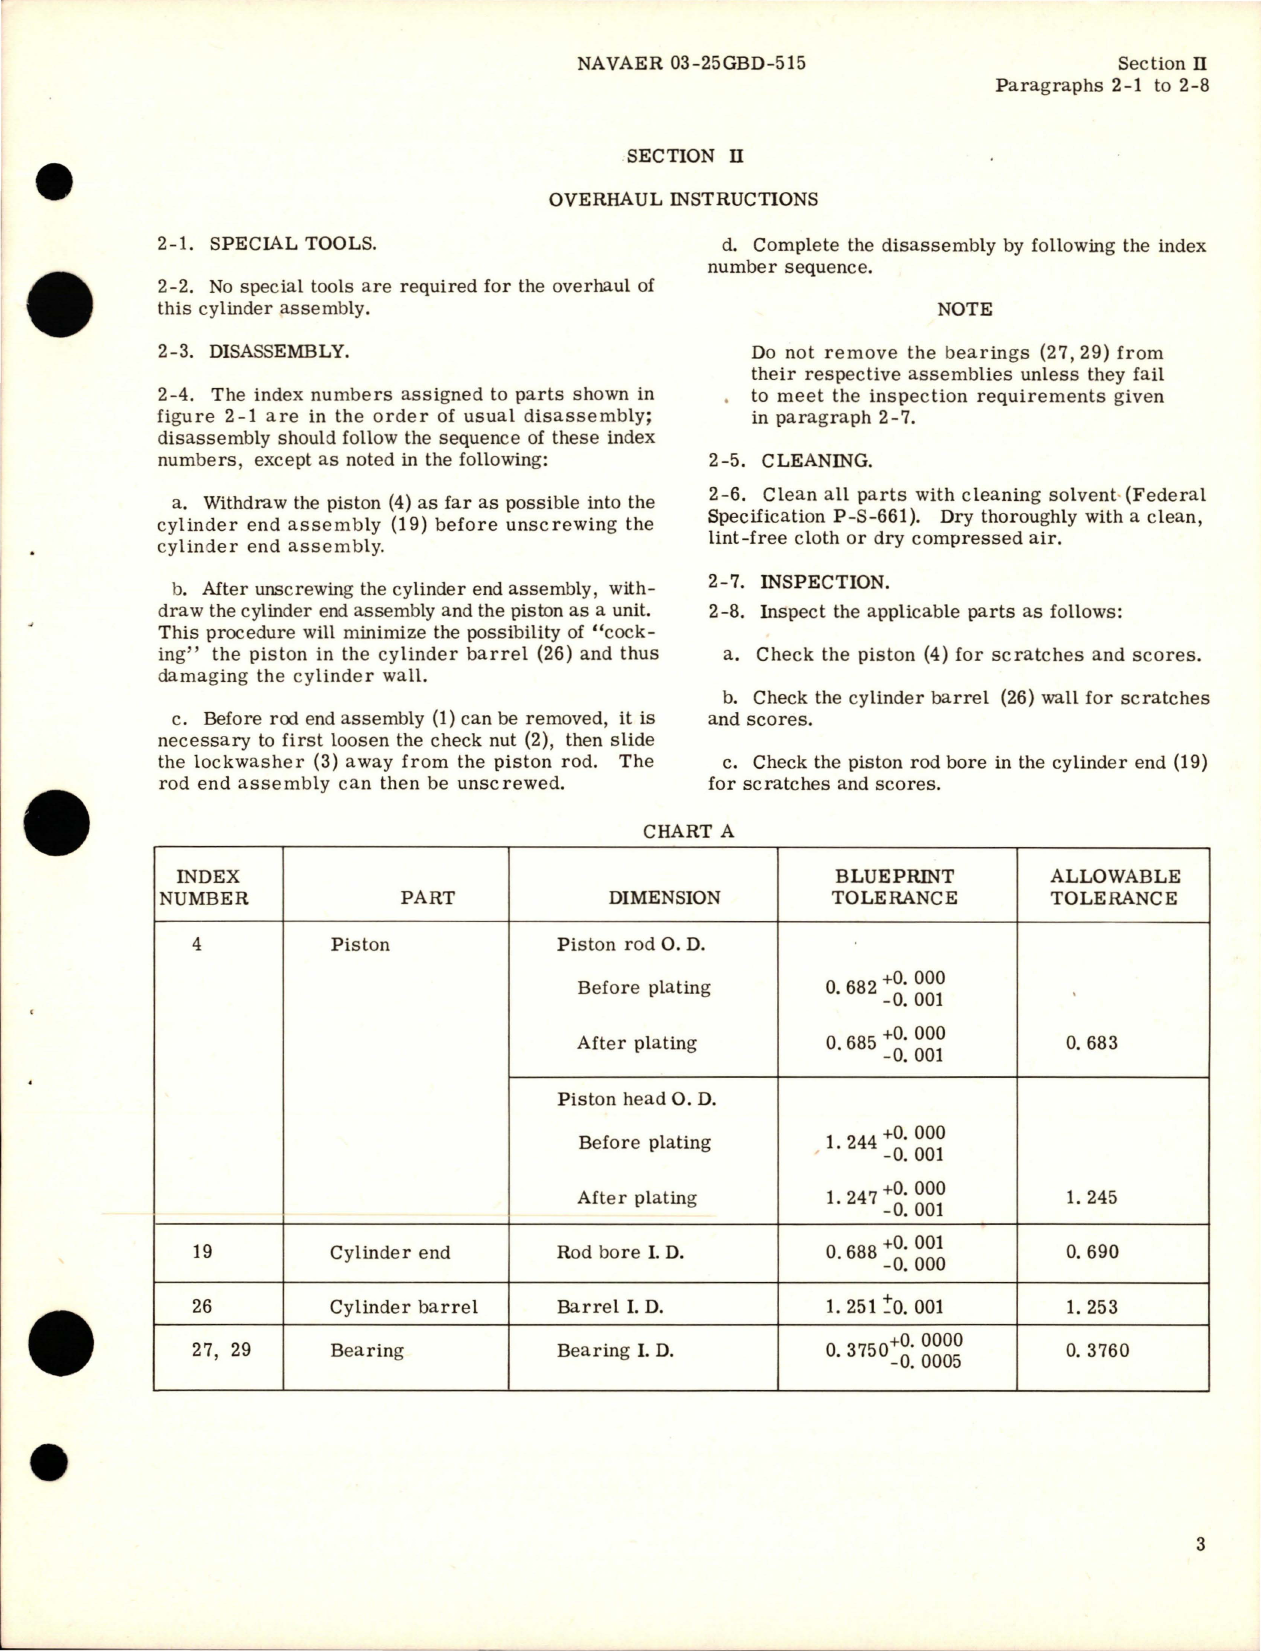 Sample page 5 from AirCorps Library document: Overhaul Instructions for Hydraulic Auxiliary Alighting Gear Fairing Door Operating Cylinder Assembly - Part 181-58035